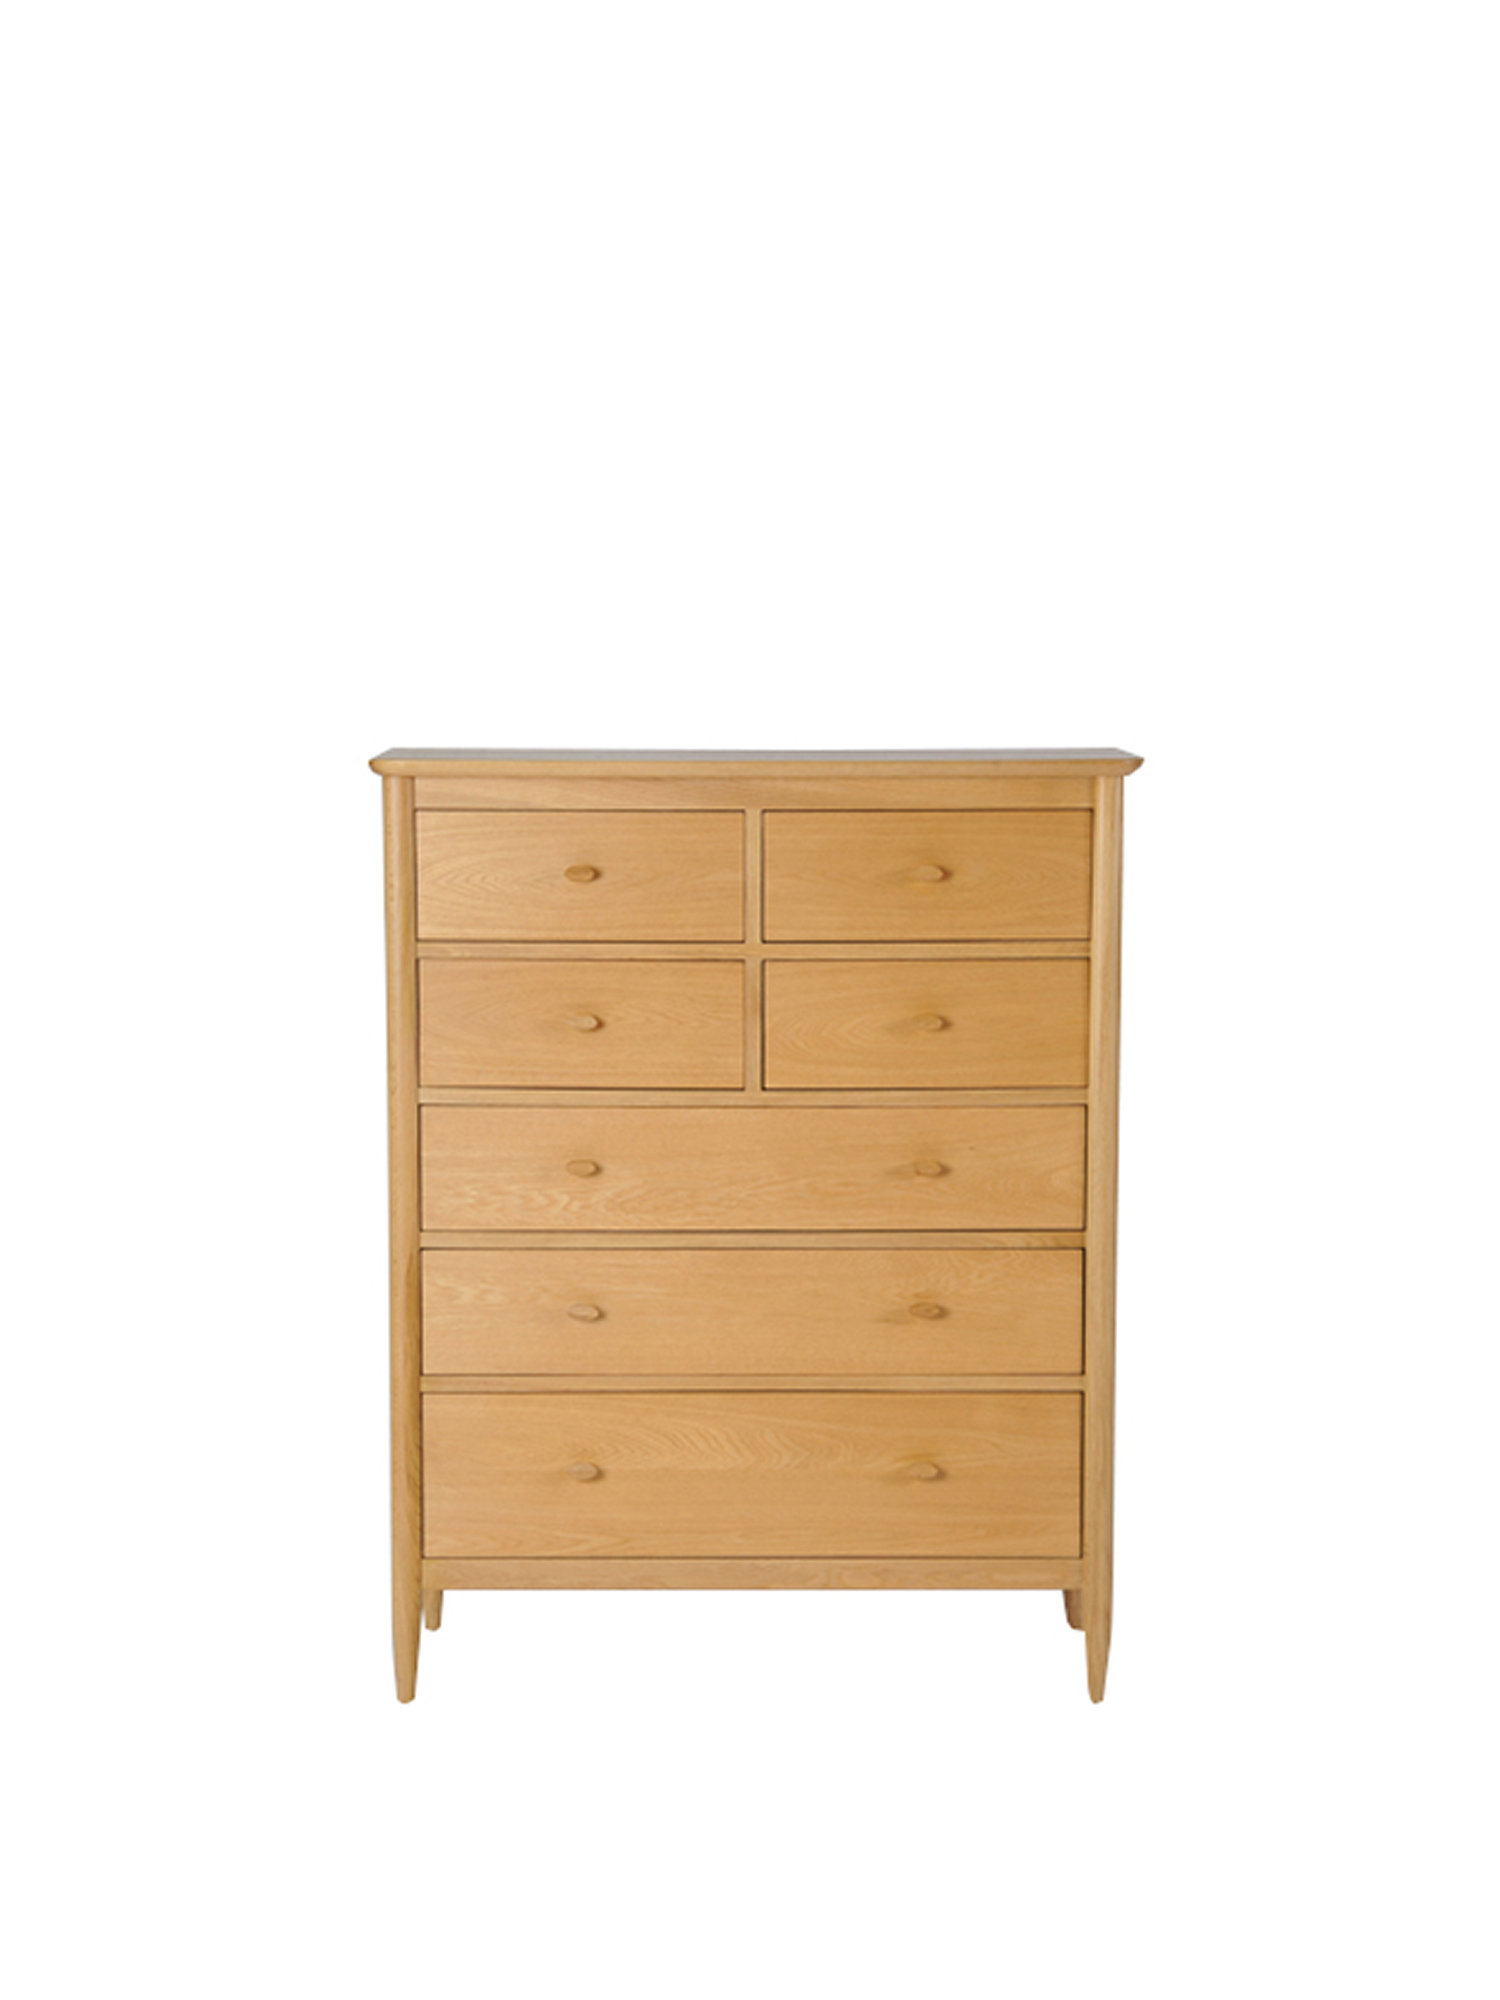 Teramo Bedroom 7 Drawer Tall Wide Chest